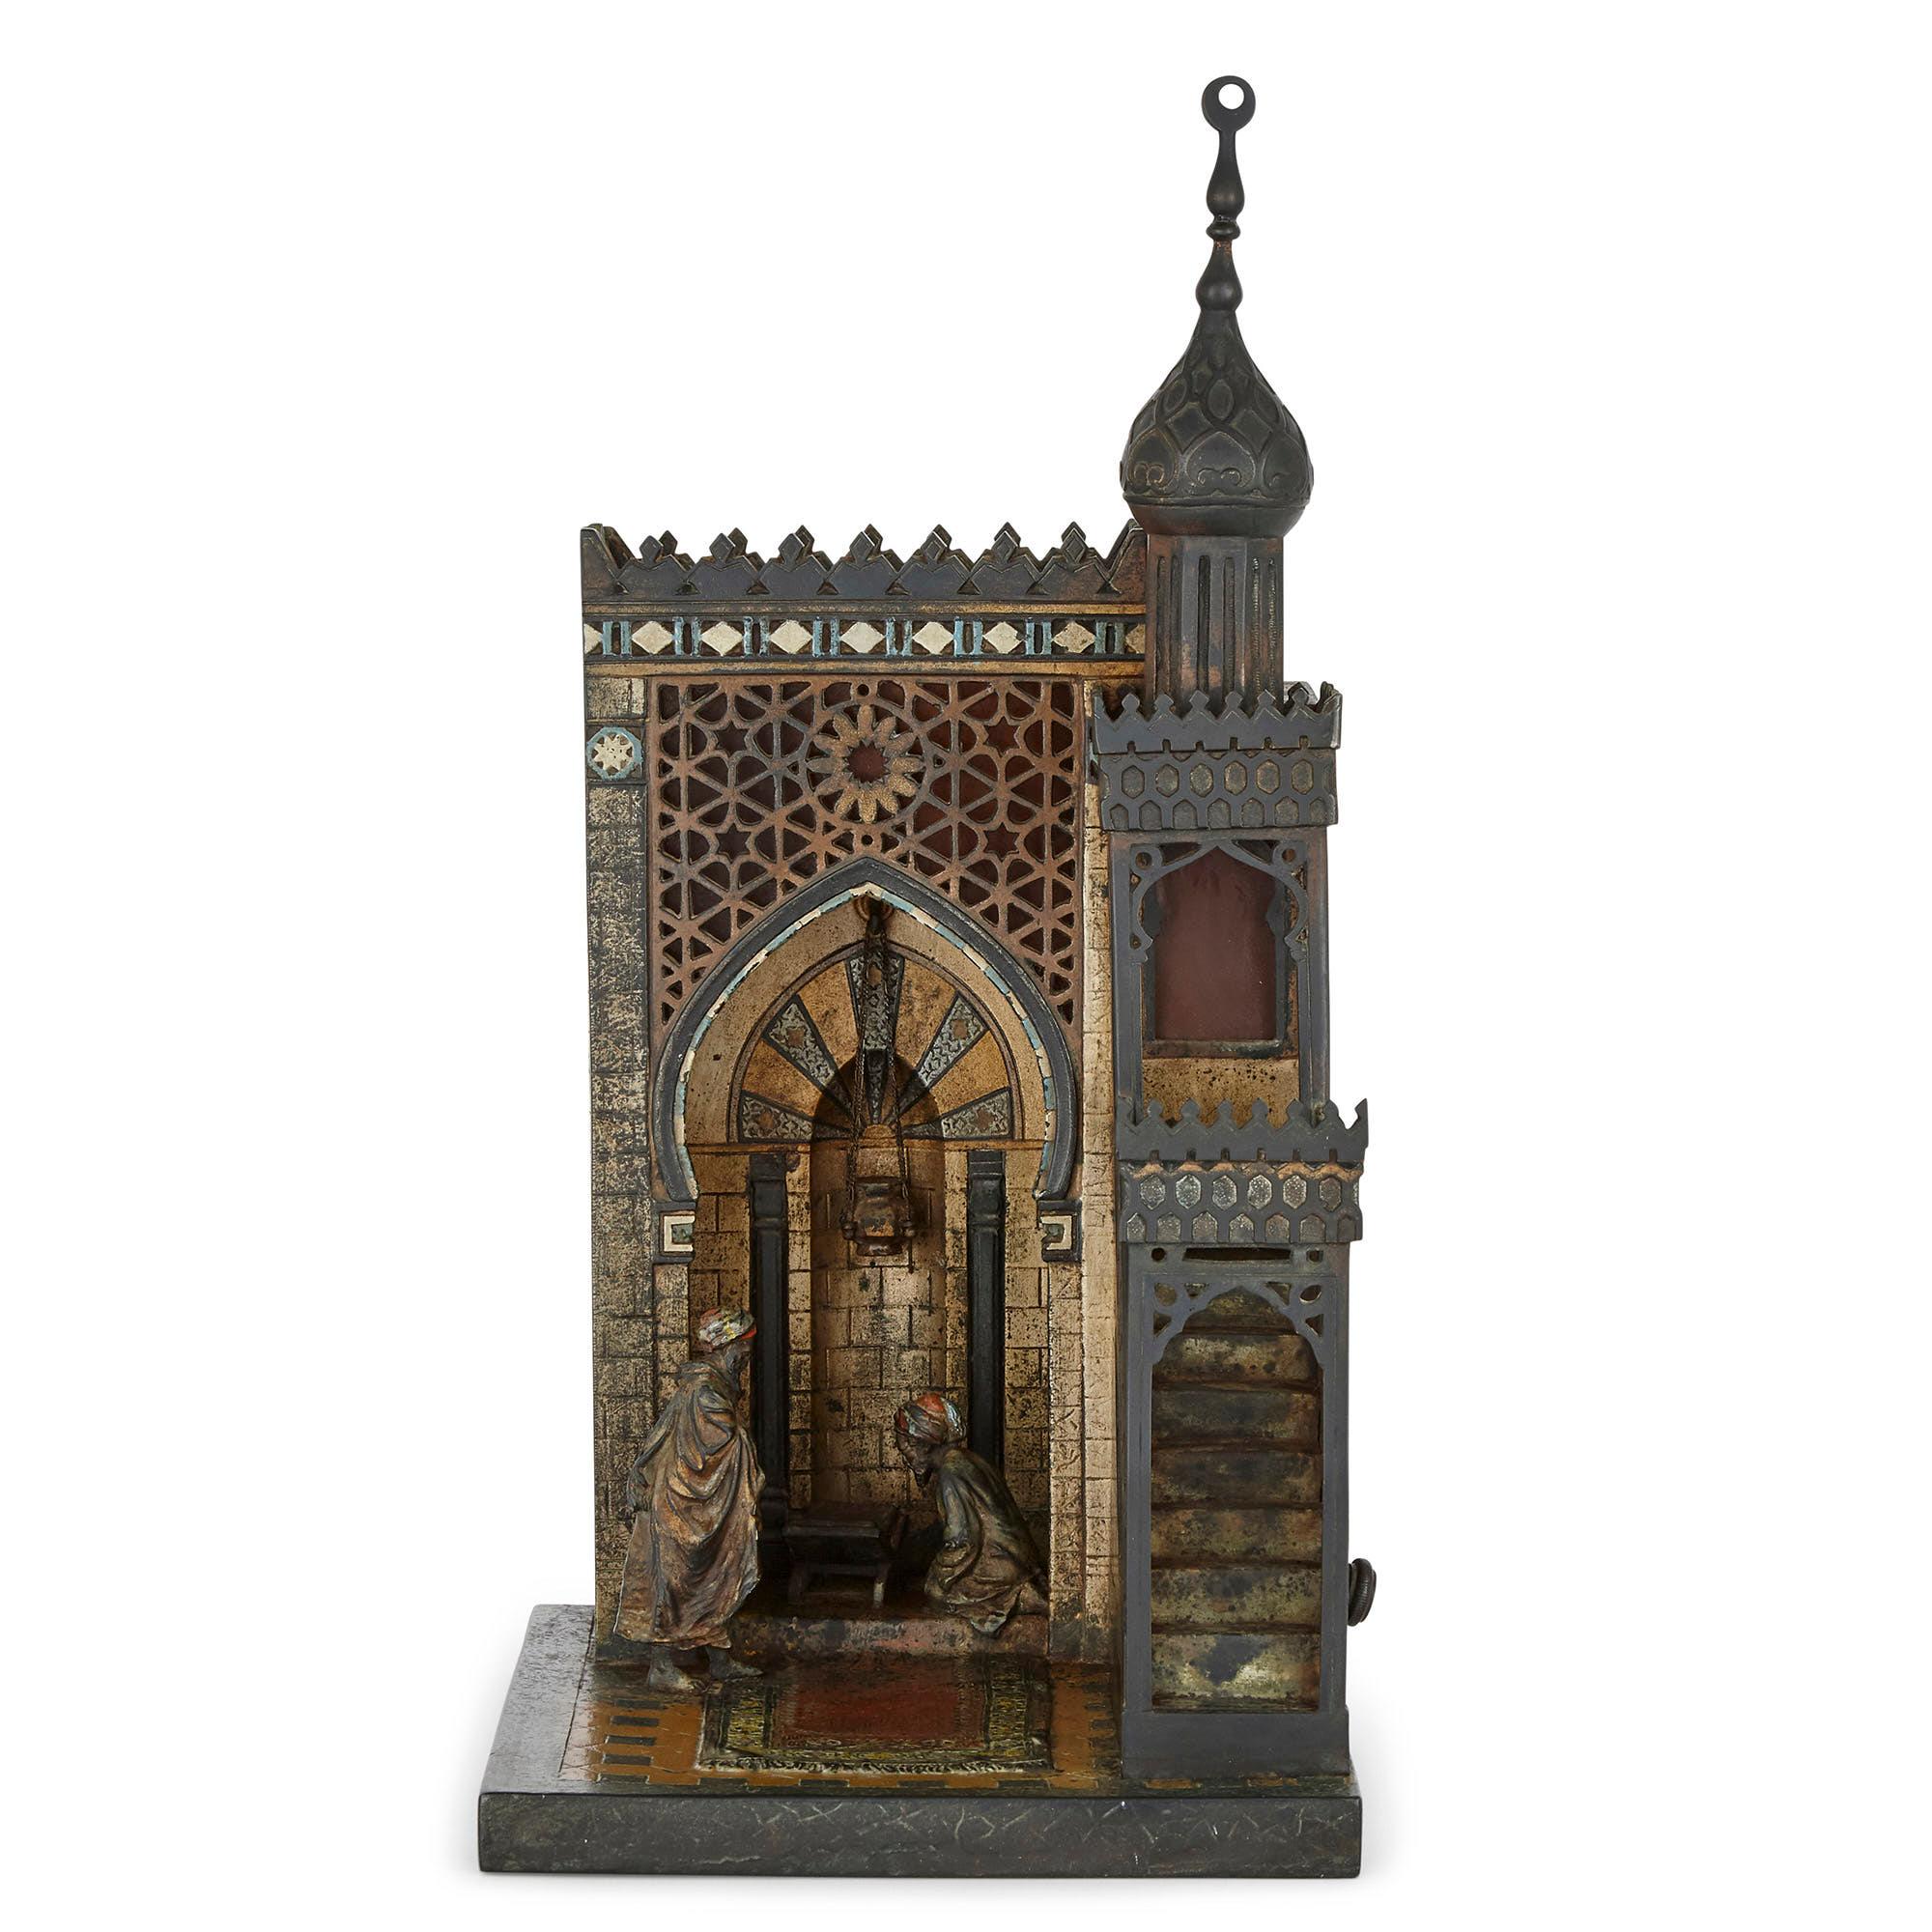 Cold-painted bronze Orientalist lamp by Anton Chotka
Austrian, circa 1900
Measures: Height 37cm, width 18cm, depth 21cm

This wonderful lamp is an exceptional example of Viennese cold-painted bronze and an evocative piece of Austrian